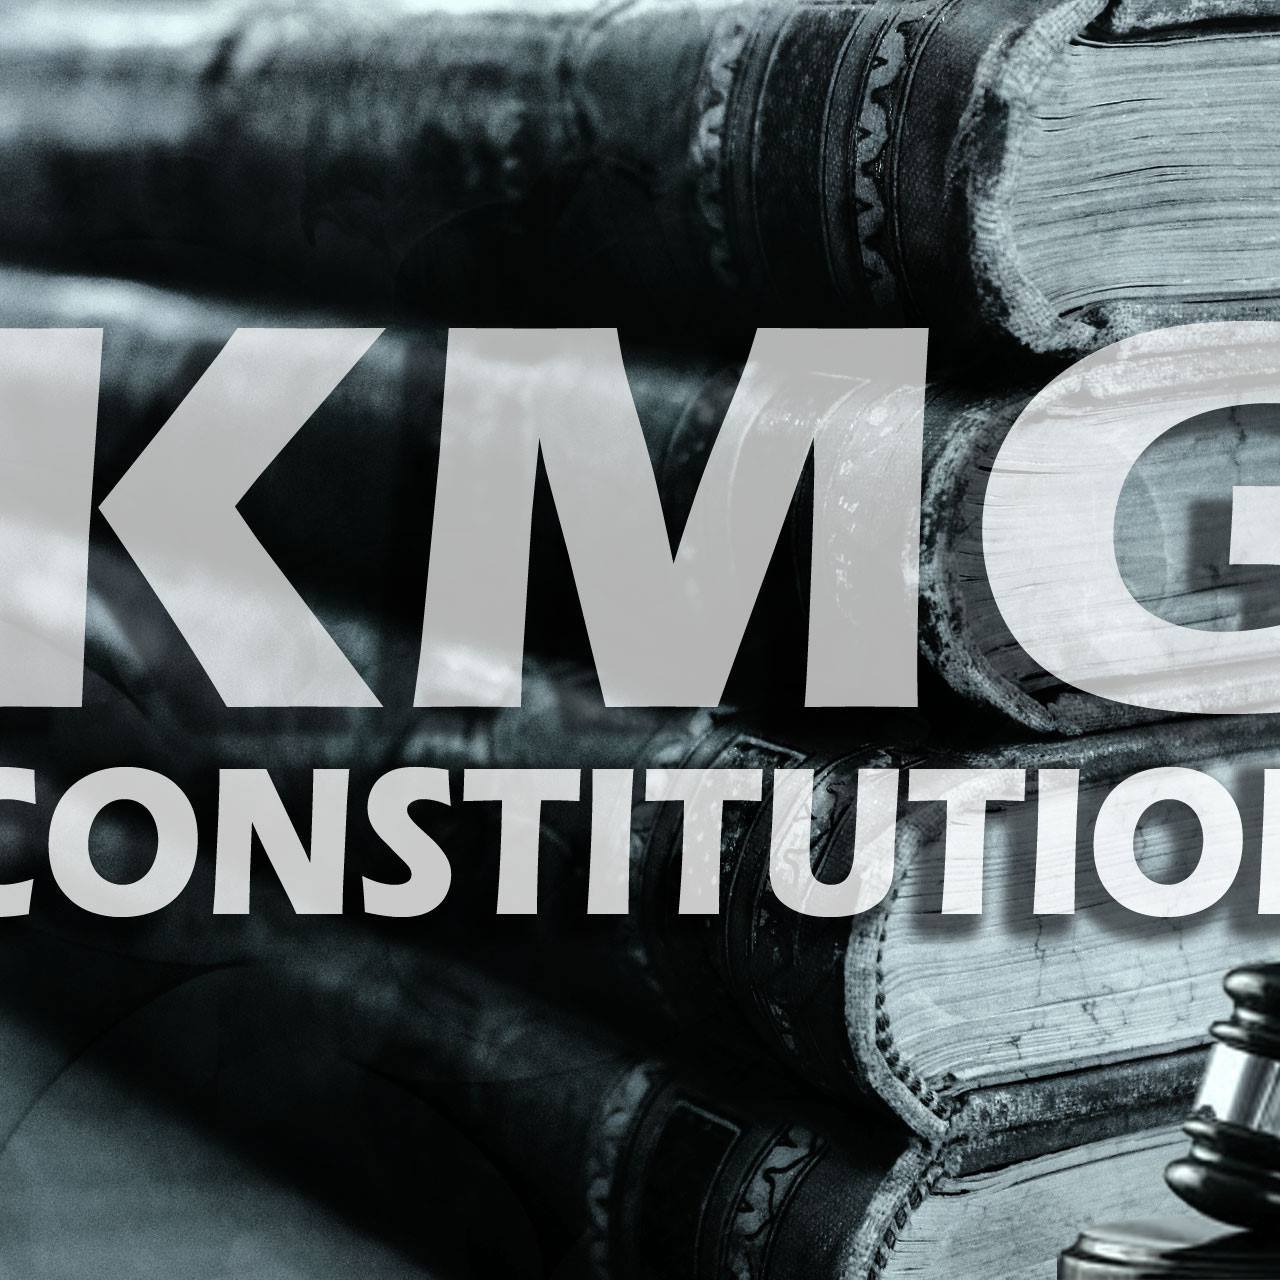 K.M.G. Drops New Single - "Constitution" (Prod. By Isidro Fortunato)